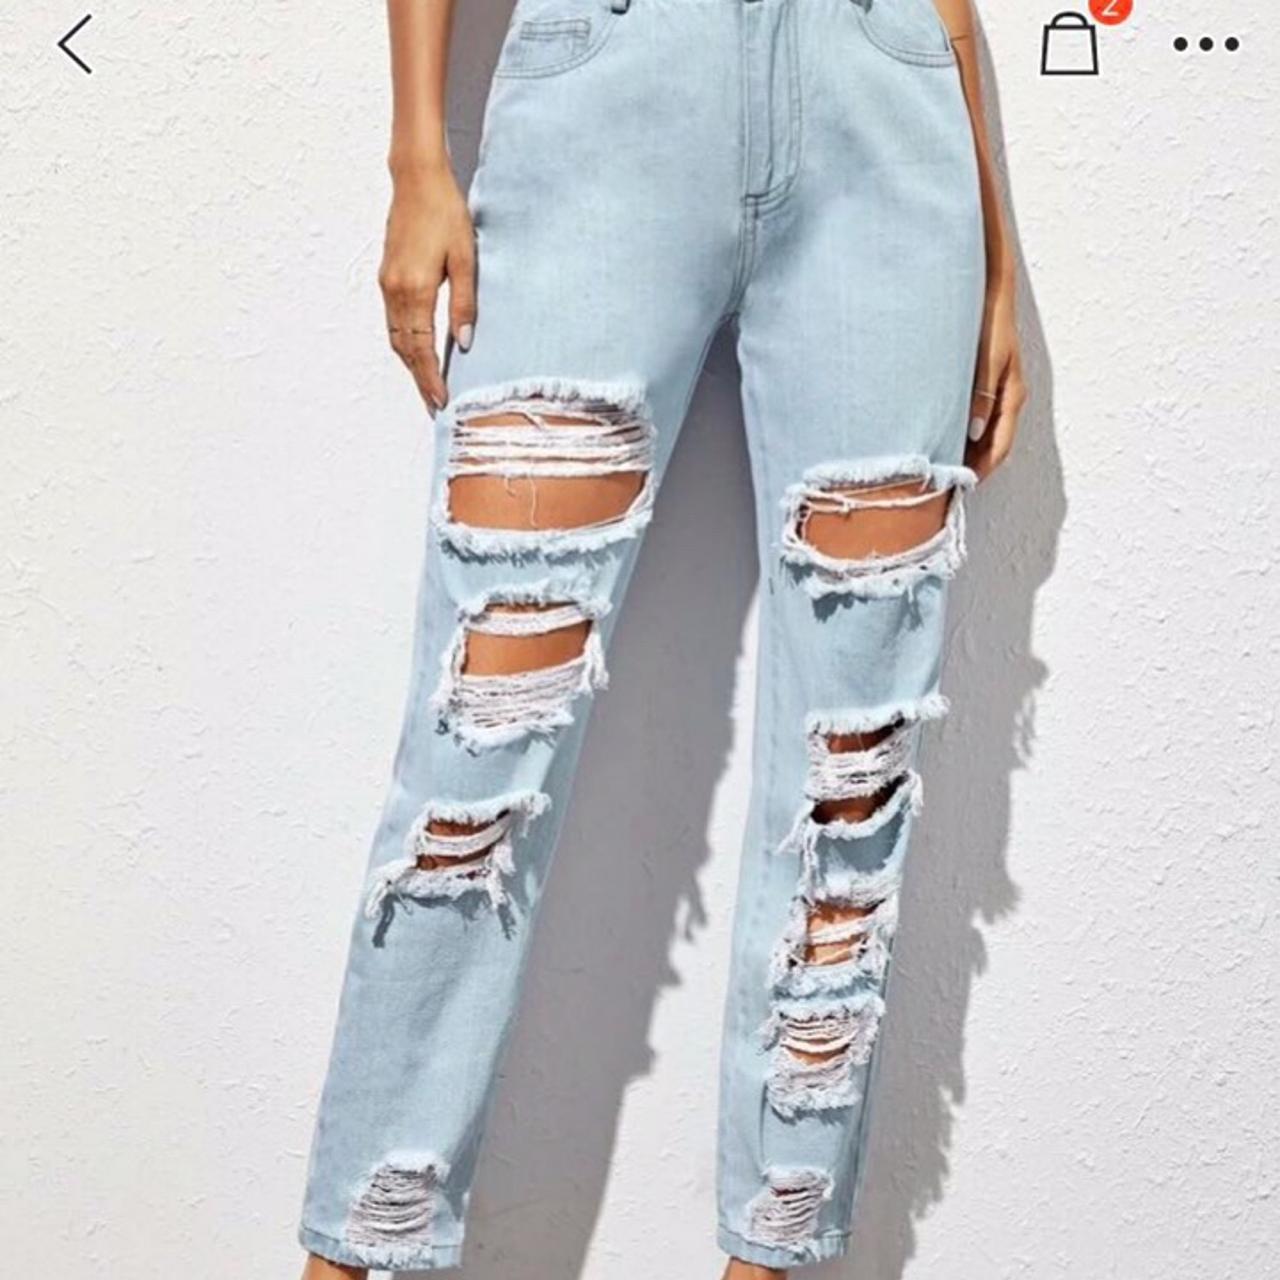 SHEIN ripped jeans Good quality and never worn out... - Depop